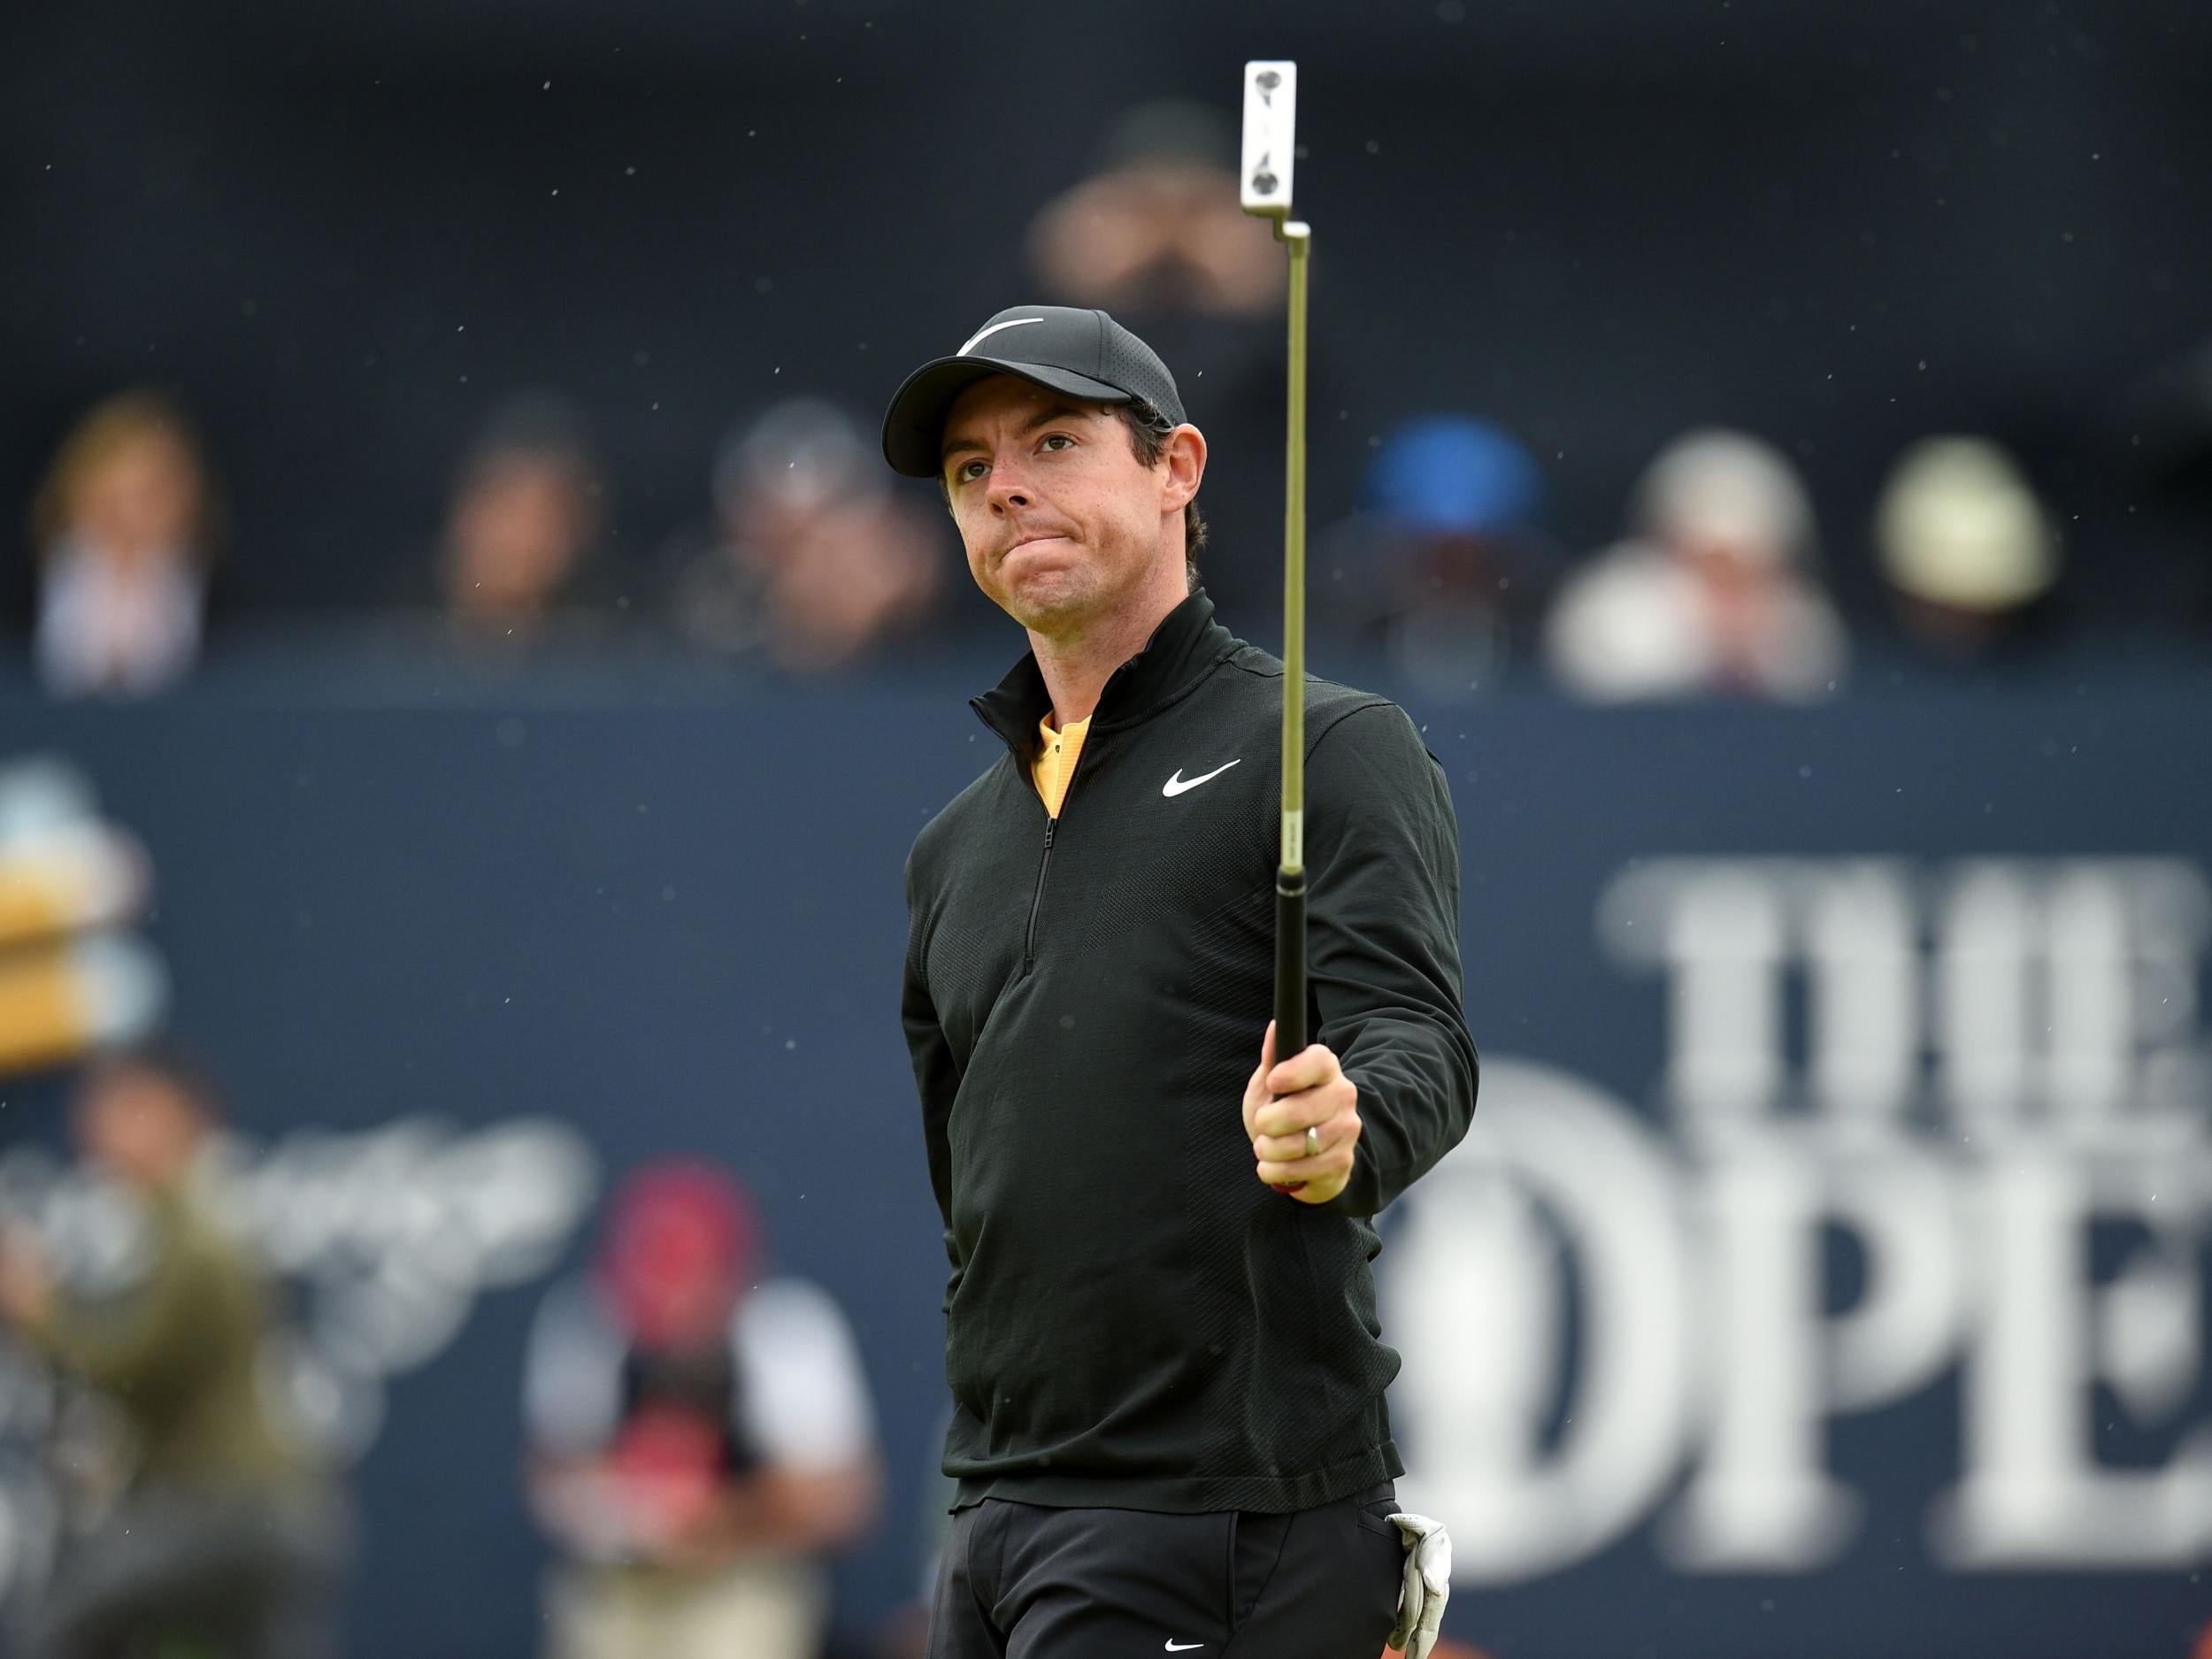 McIlory admitted he will be hurt if he fails to win the set of Majors before Spieth